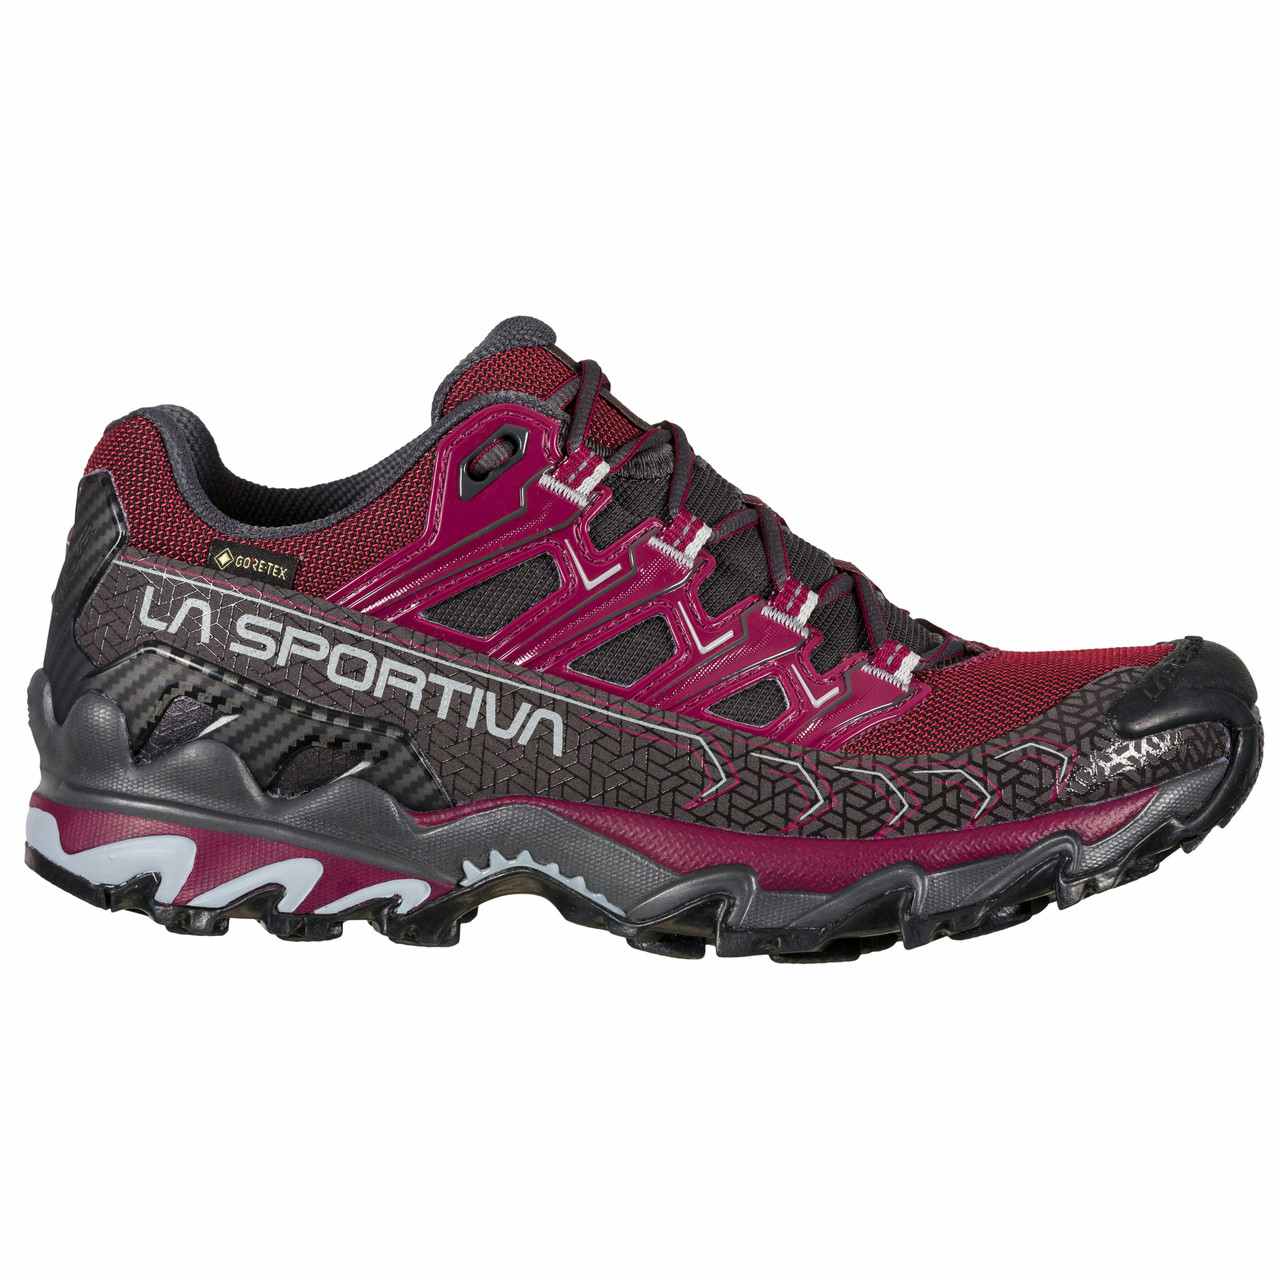 Ultra Raptor II Gore-Tex Trail Running Shoes Red Plum/Carbon